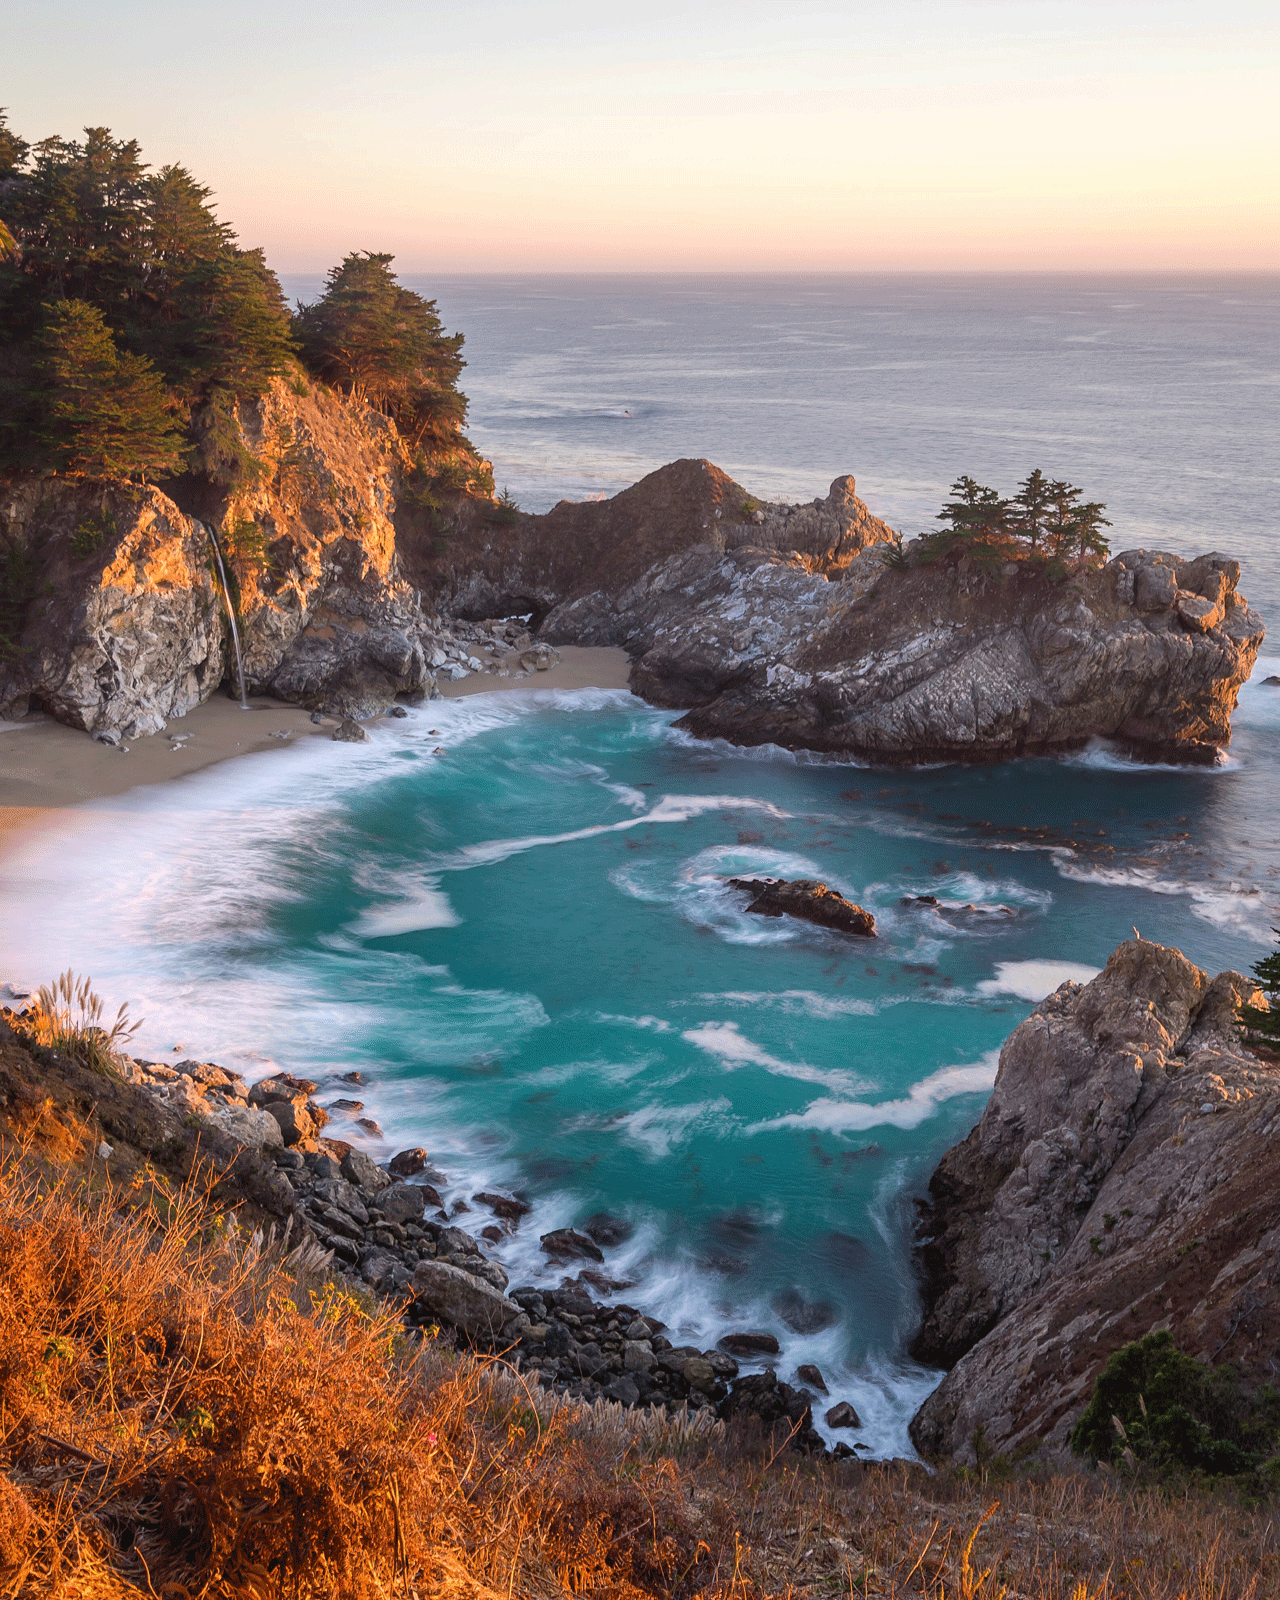 A breathtaking view of a serene, turquoise cove along a rugged coastline at sunset. A gentle waterfall cascades onto the sandy beach, surrounded by rocky cliffs and lush greenery. The sky is painted with warm hues of orange and pink, reflecting on the tranquil water.